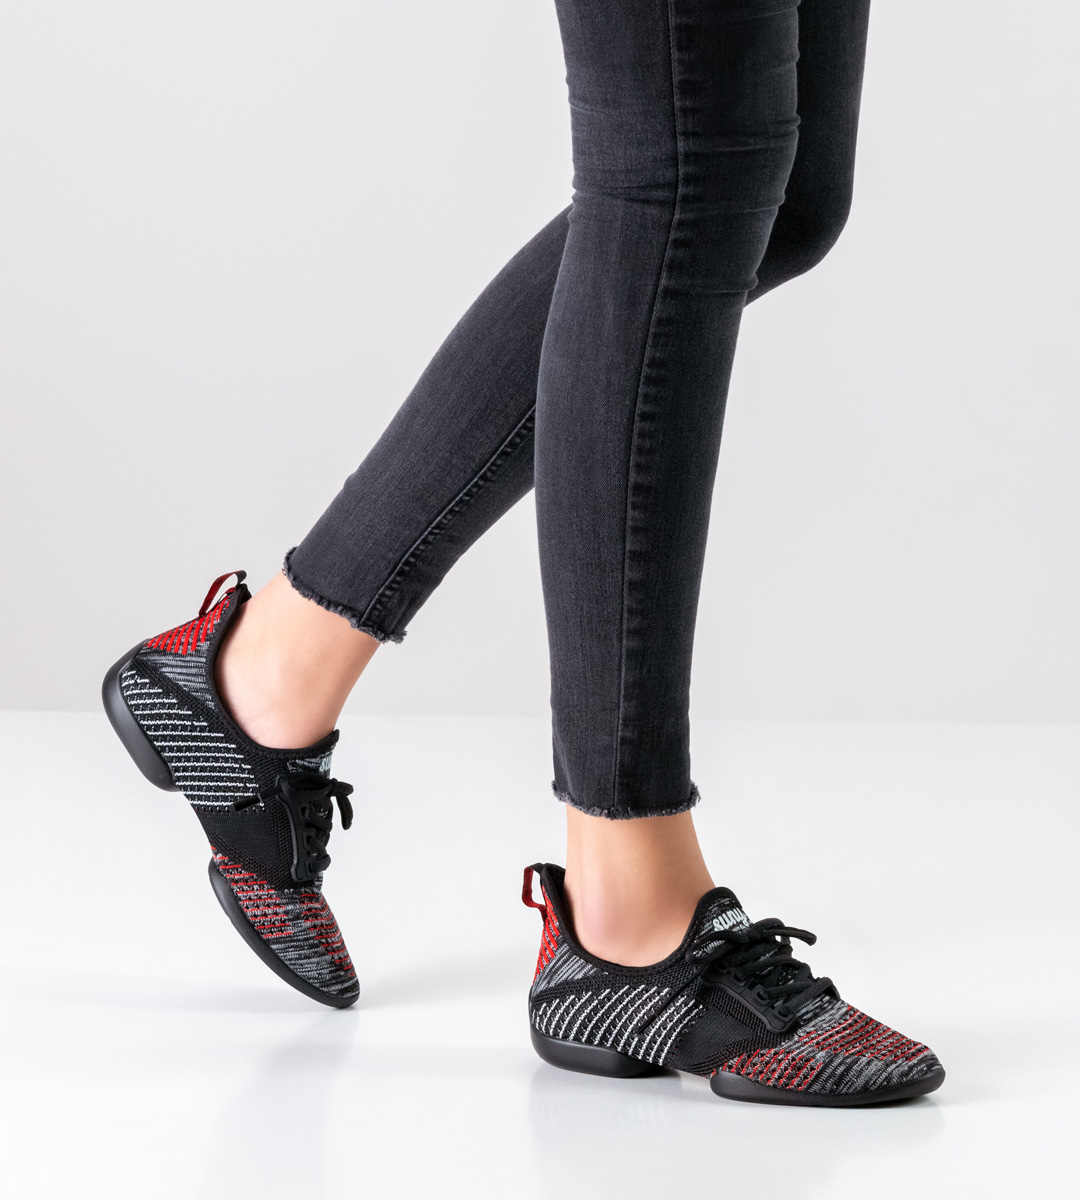 Black trousers in combination with women's dance shoe sneakers by Suny